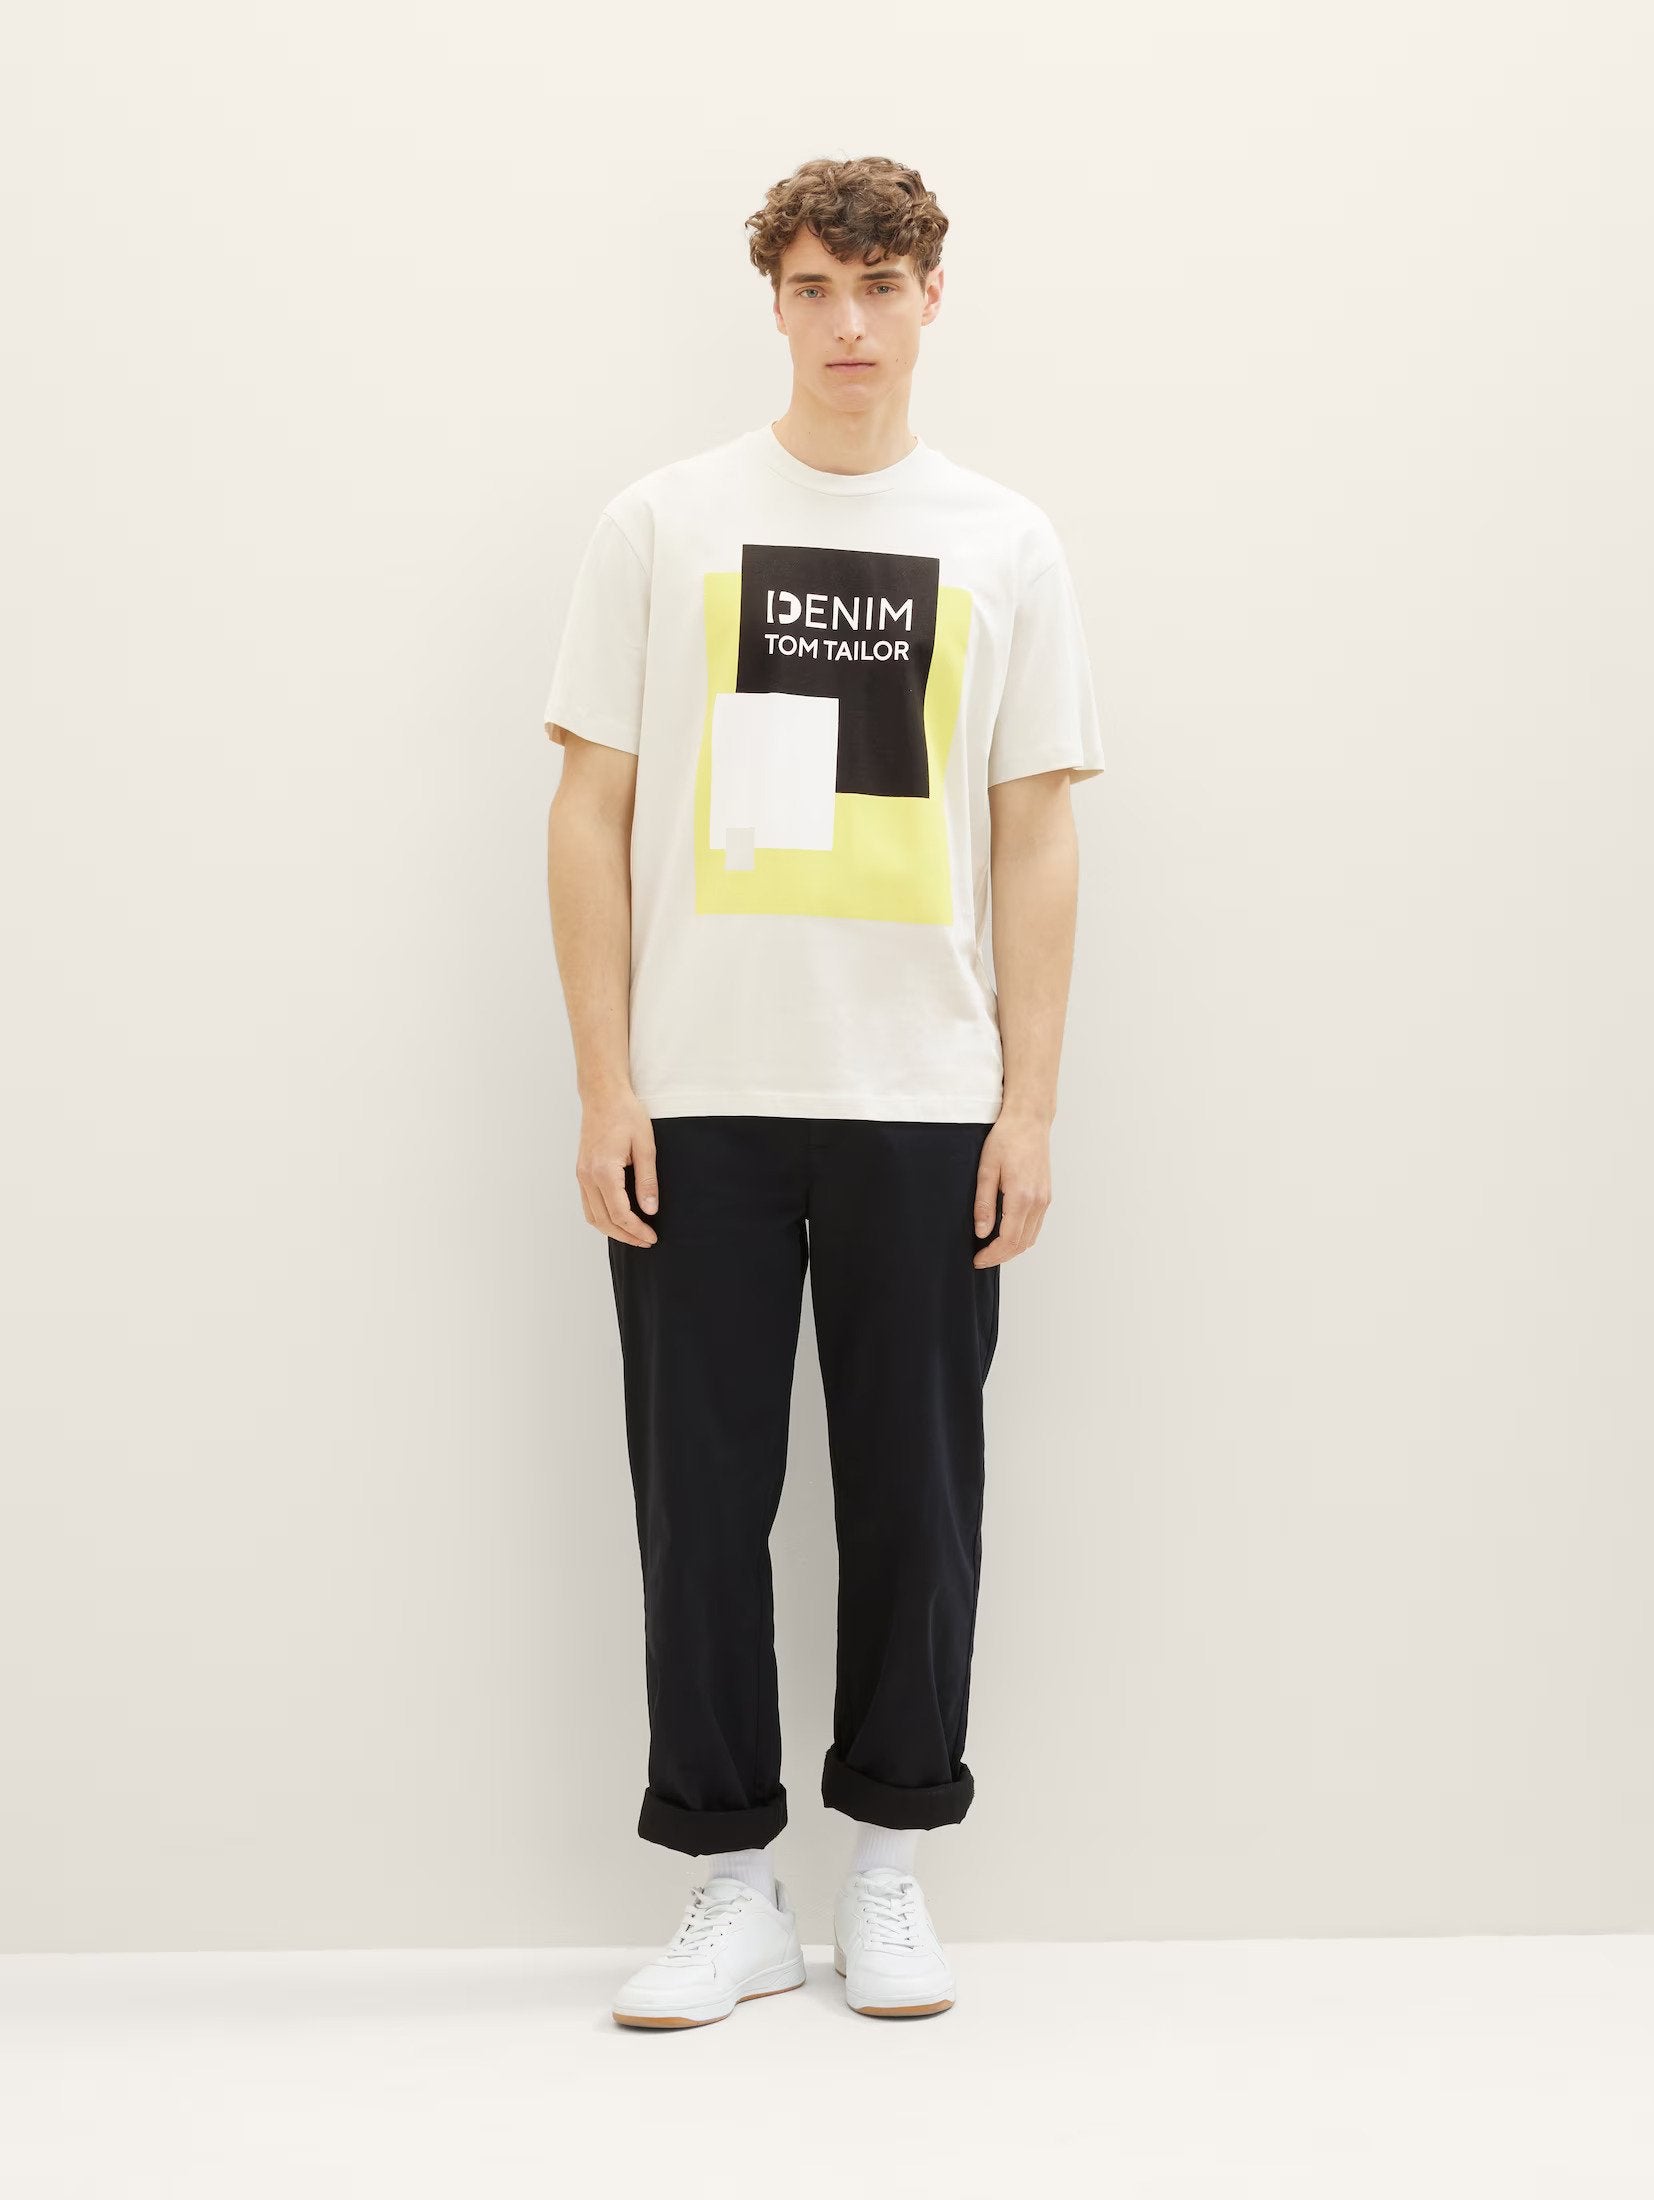 Tom Tailor Beige T-Shirt with a Print